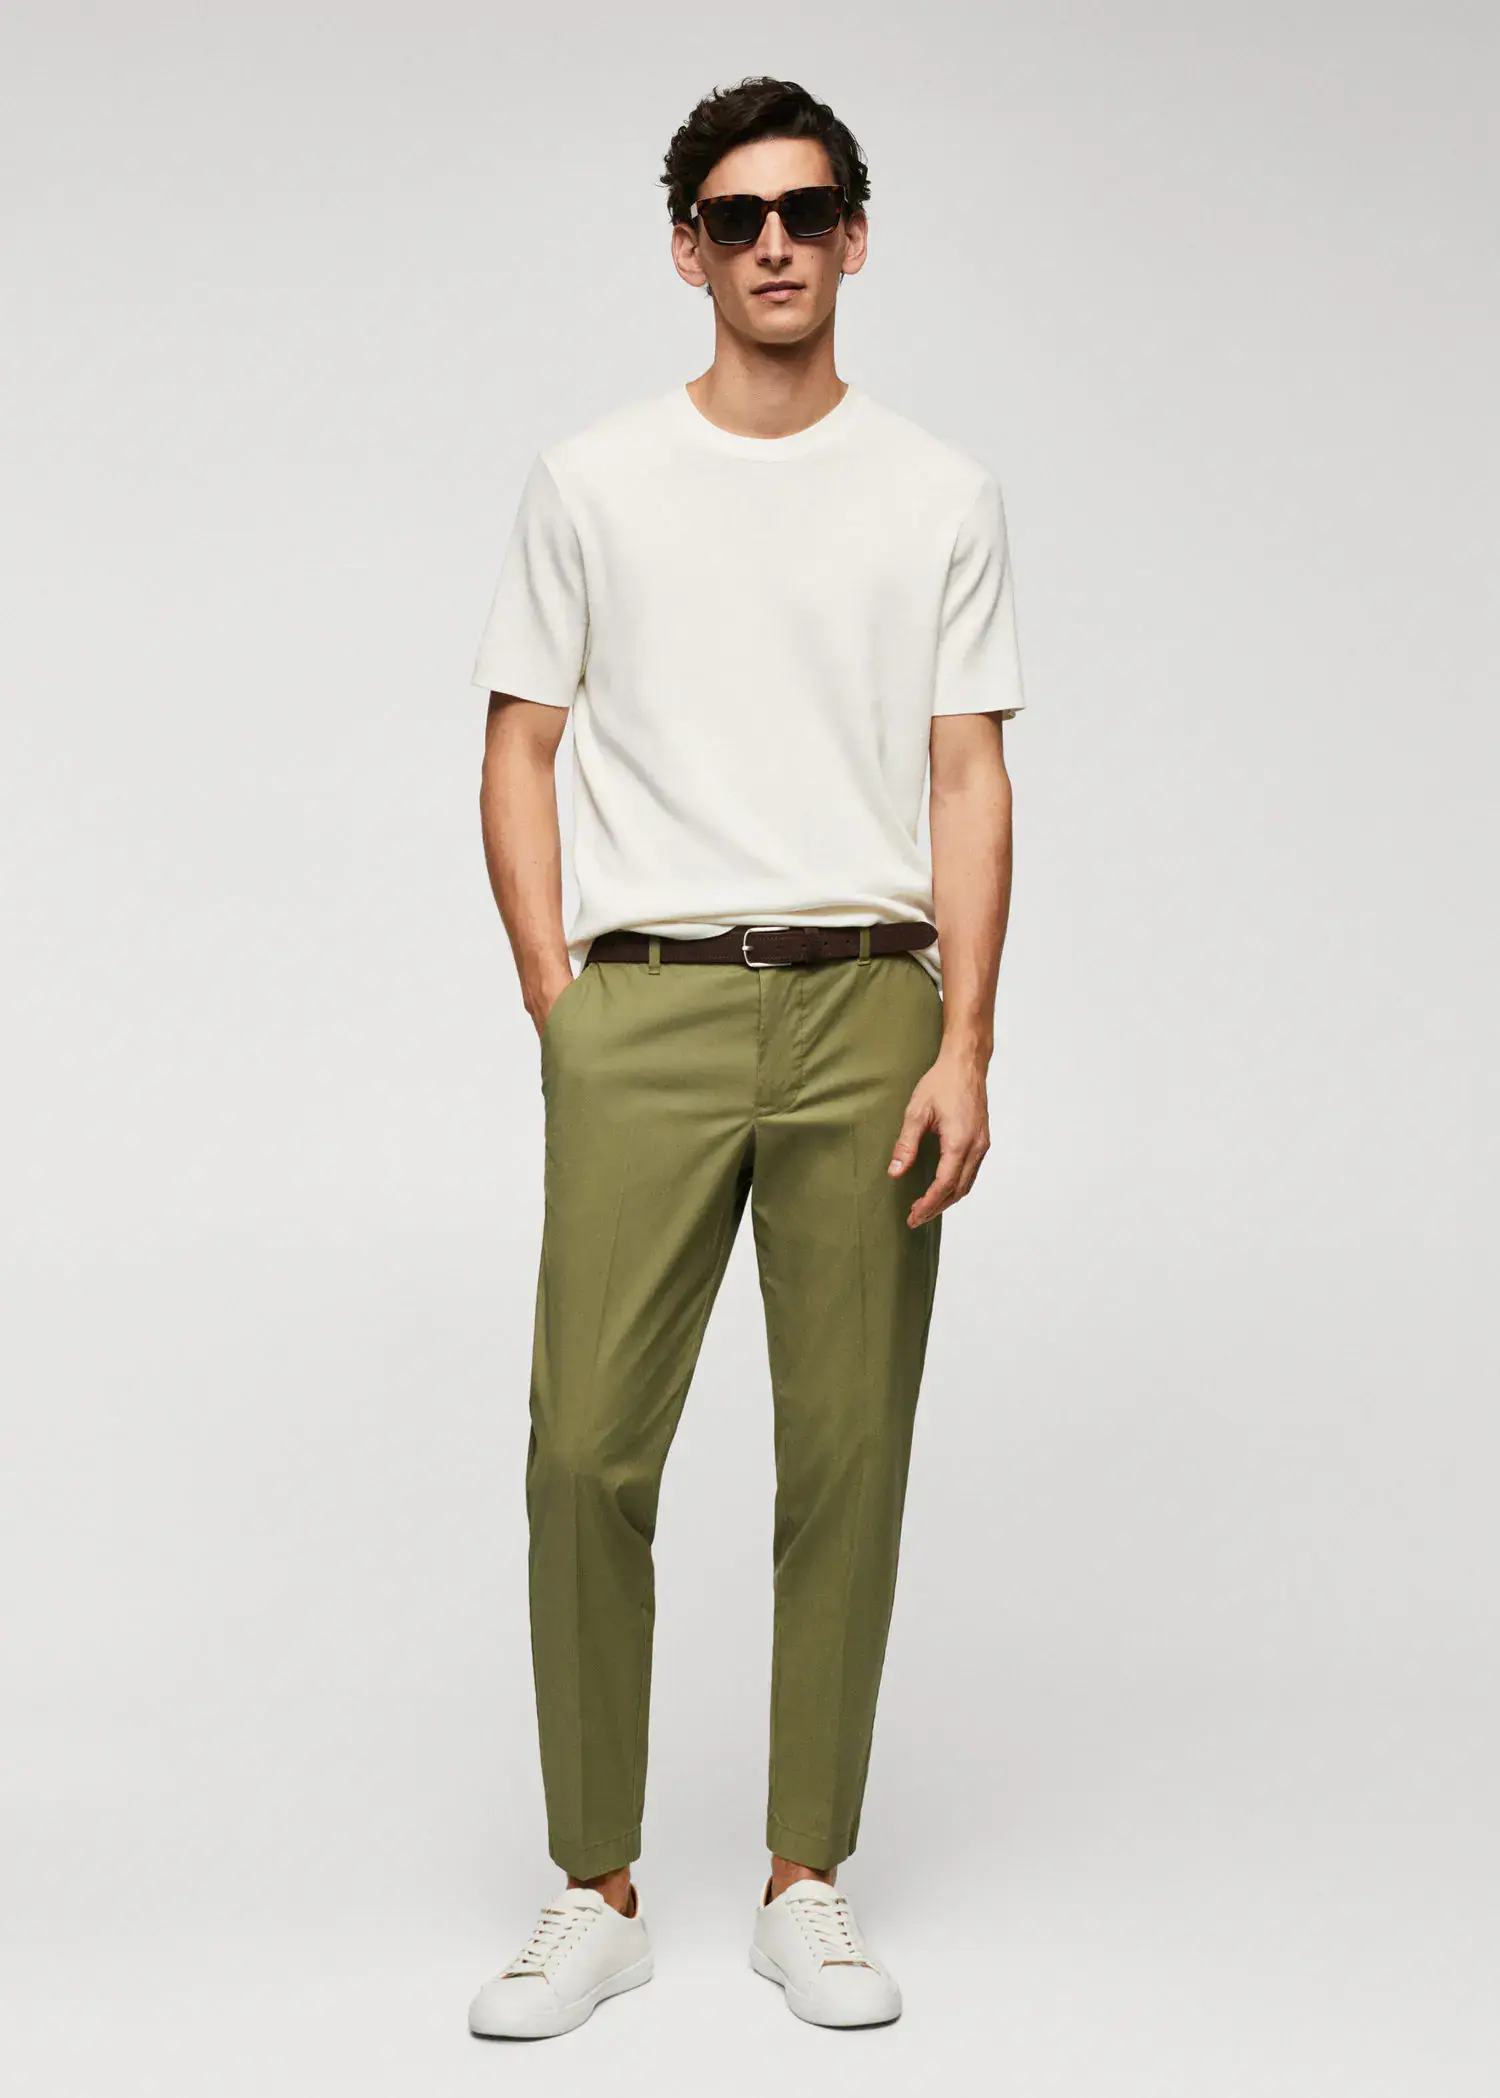 Mango Slim-fit cotton trousers. a man in a white shirt and green pants. 